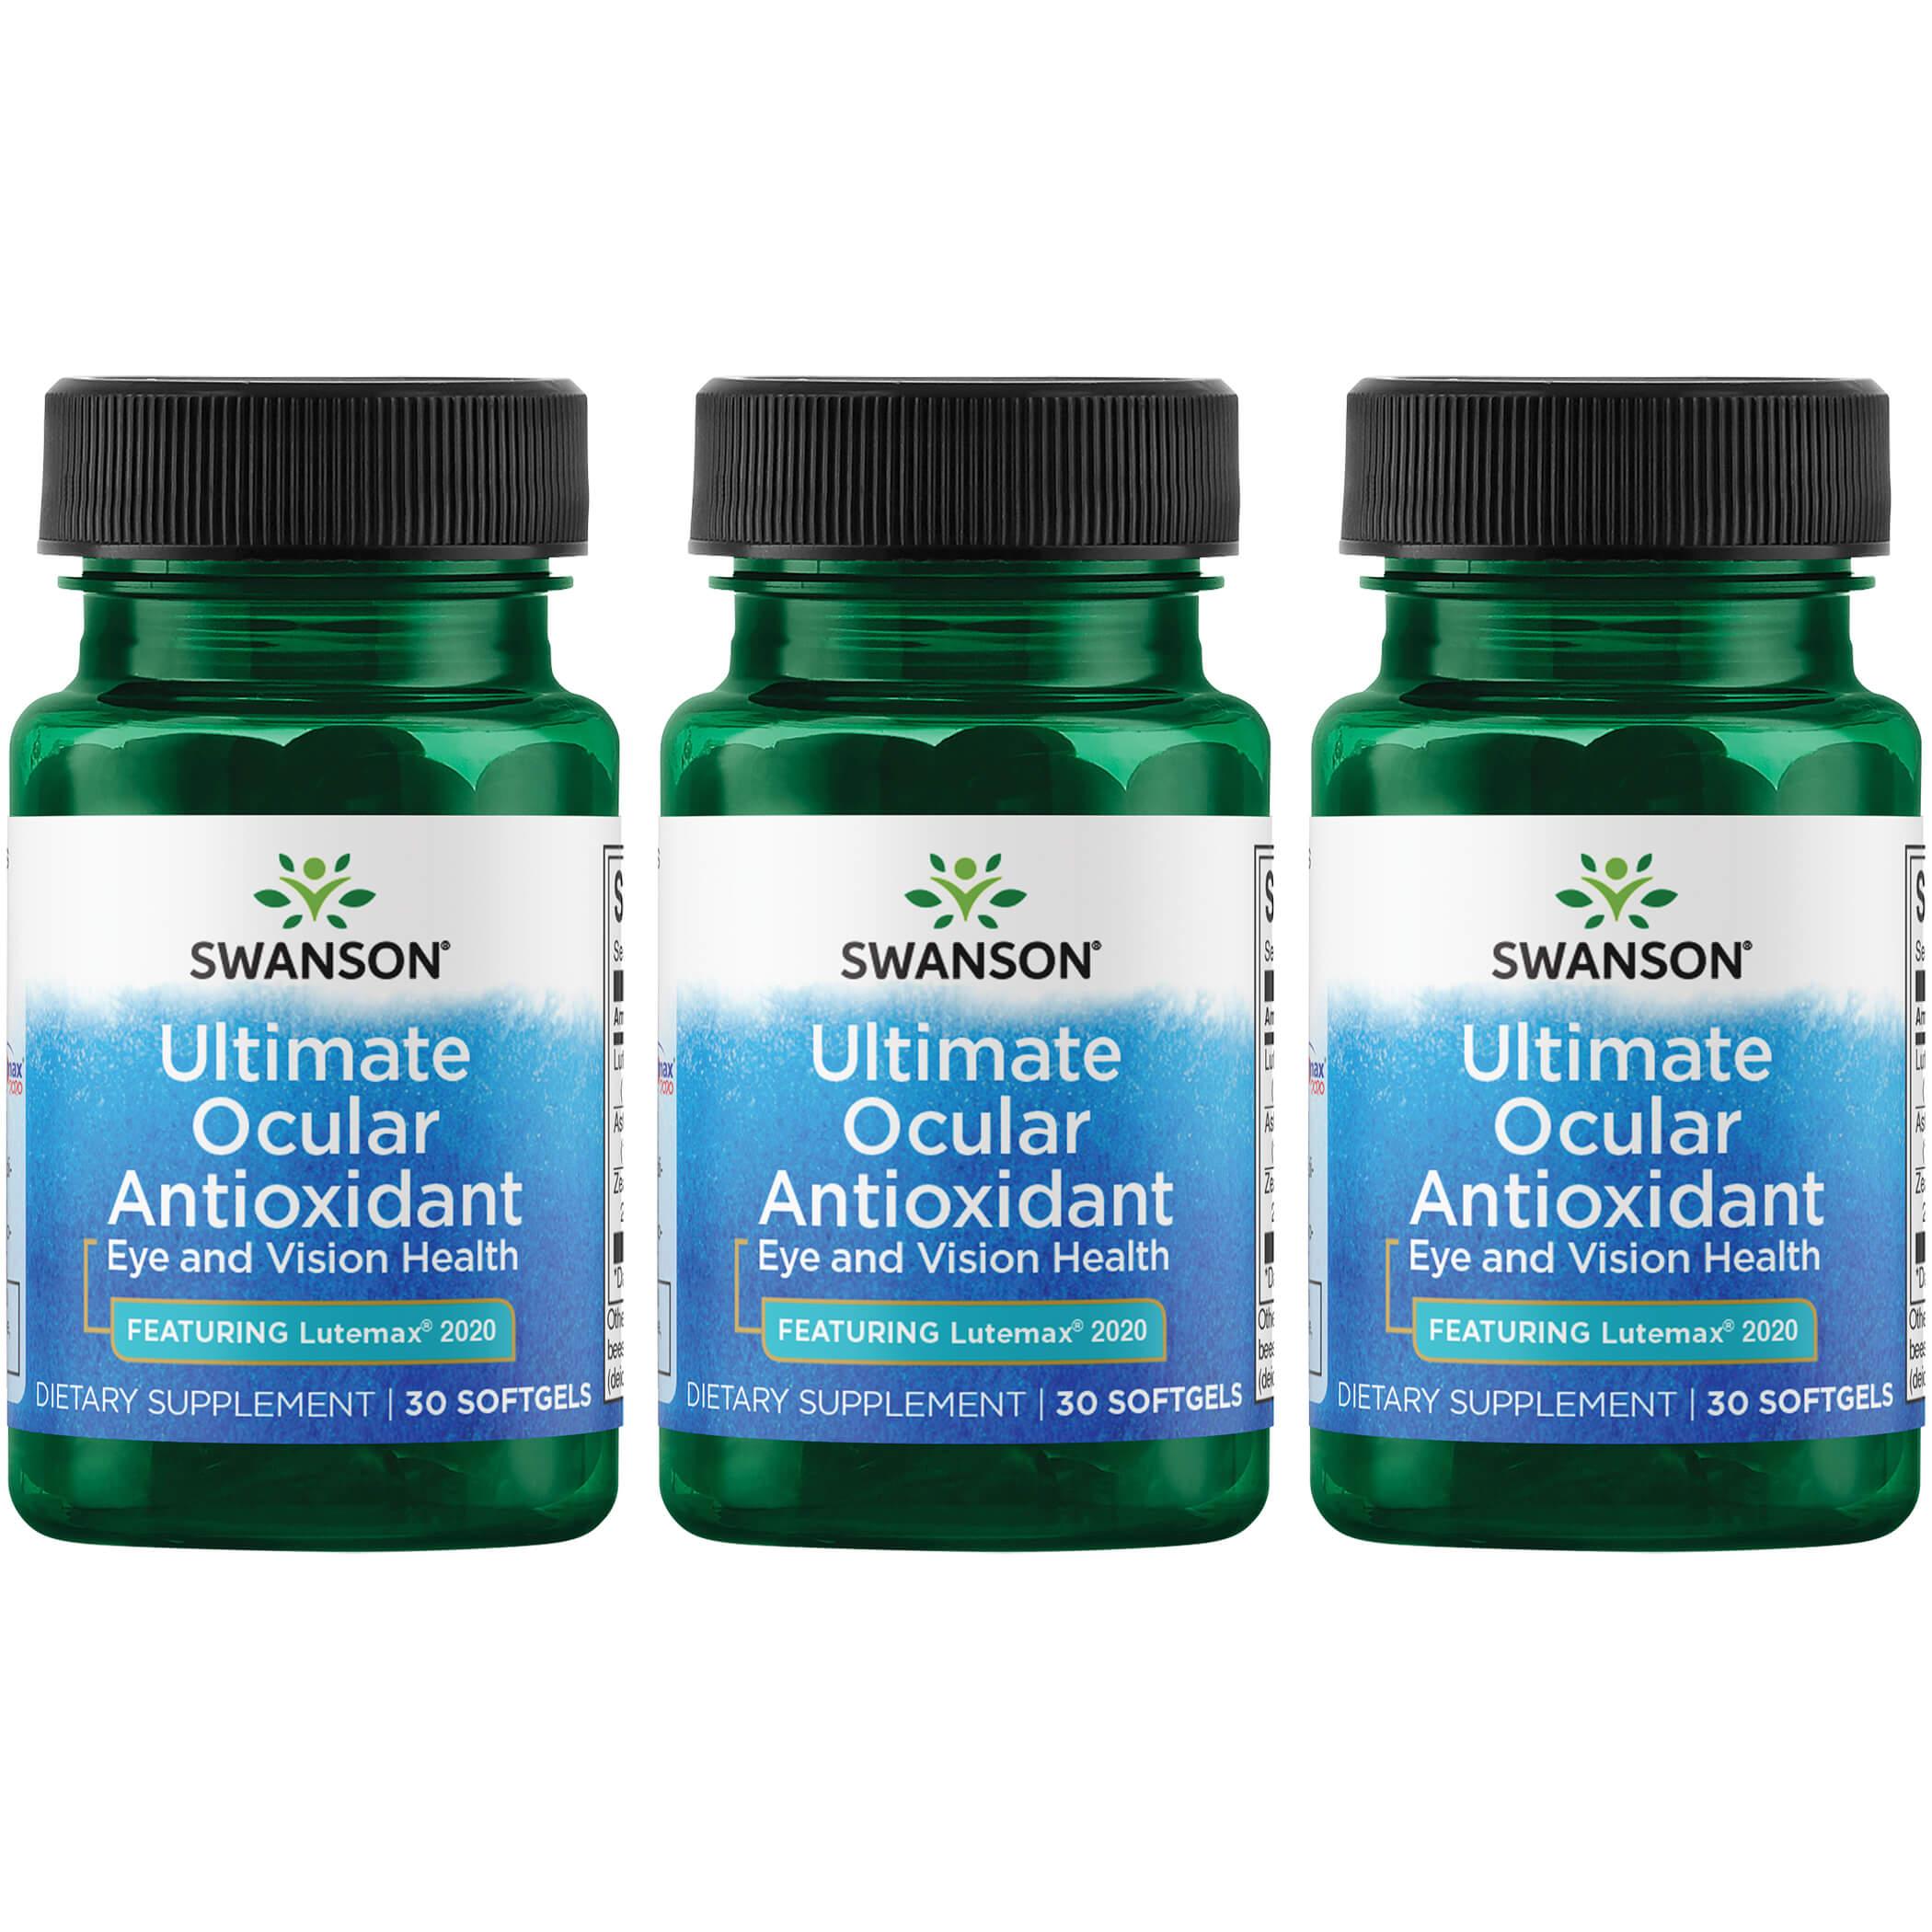 Swanson Ultra Ultimate Ocular Antioxidant - Featuring Lutemax 2020 3 Pack Vitamin 30 Soft Gels